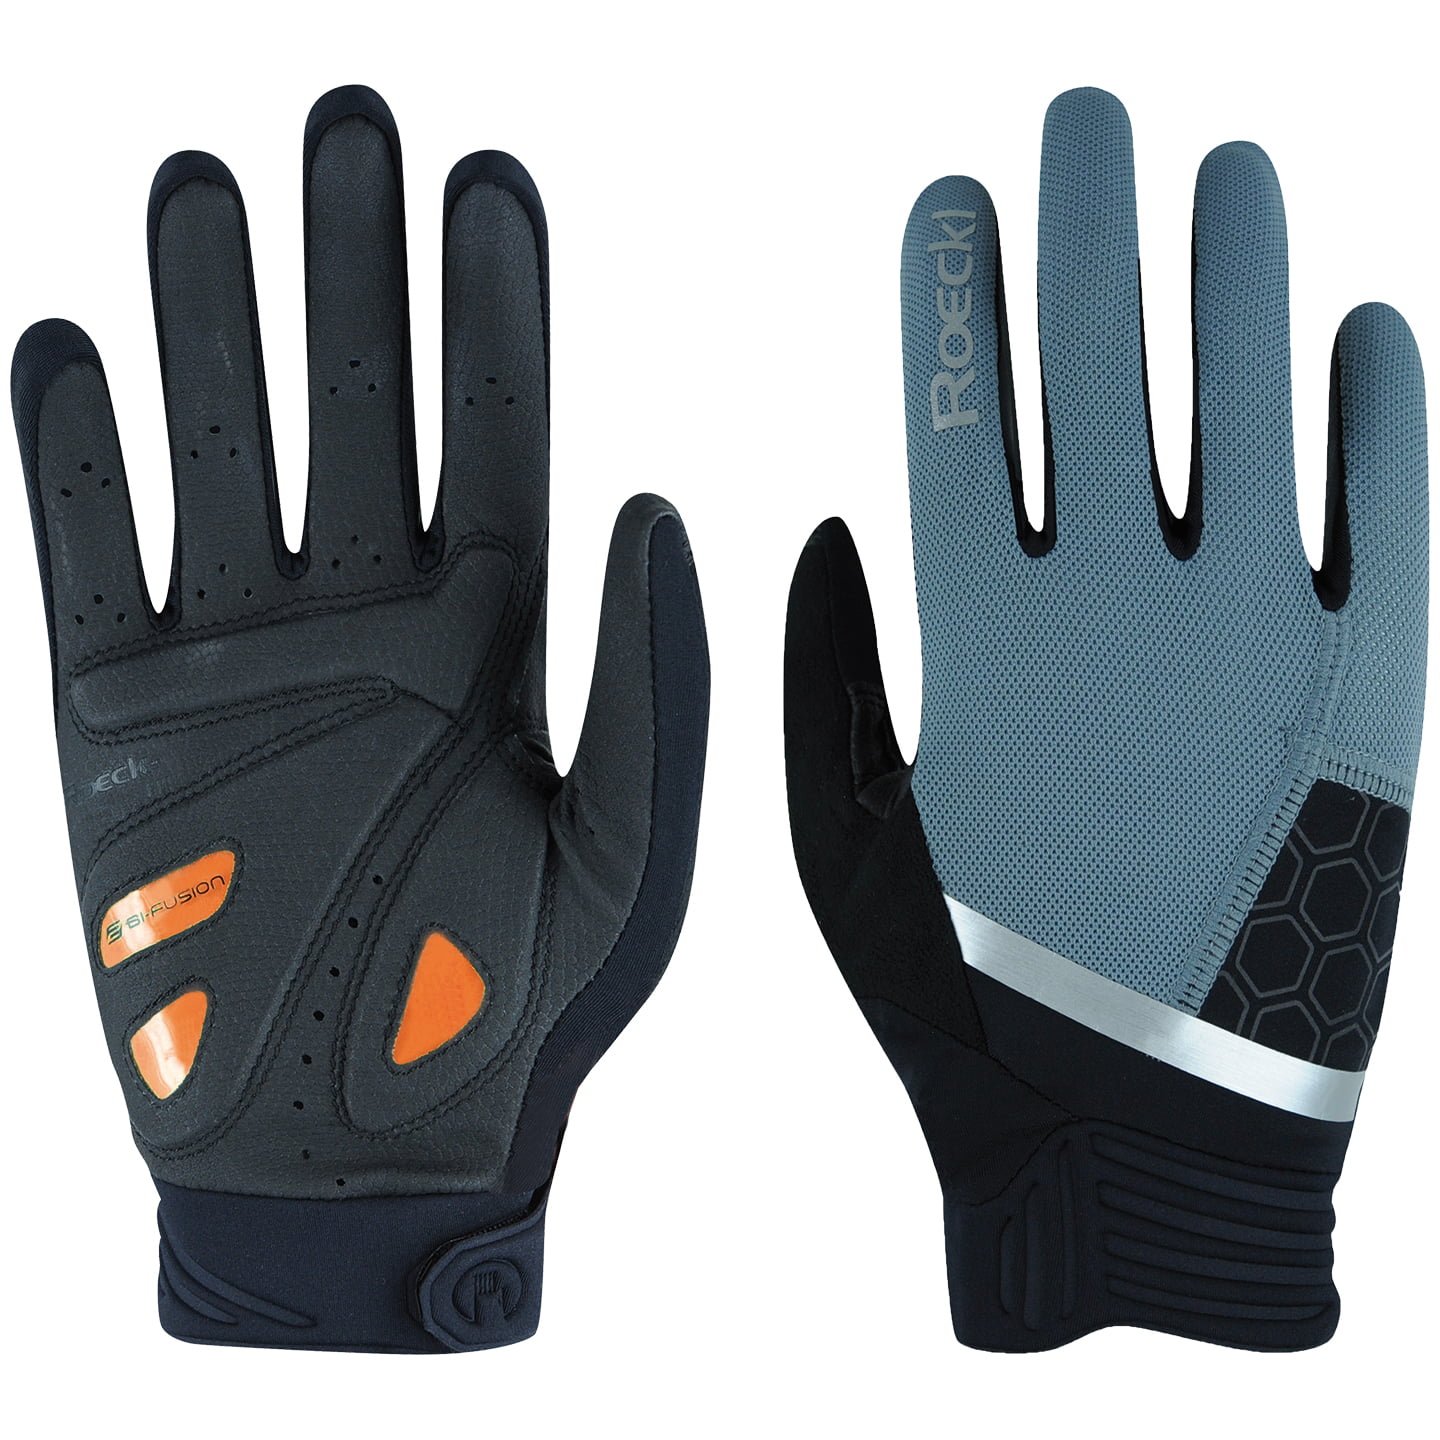 ROECKL Morgex Full Finger Gloves Cycling Gloves, for men, size 8,5, MTB gloves, Cycling apparel